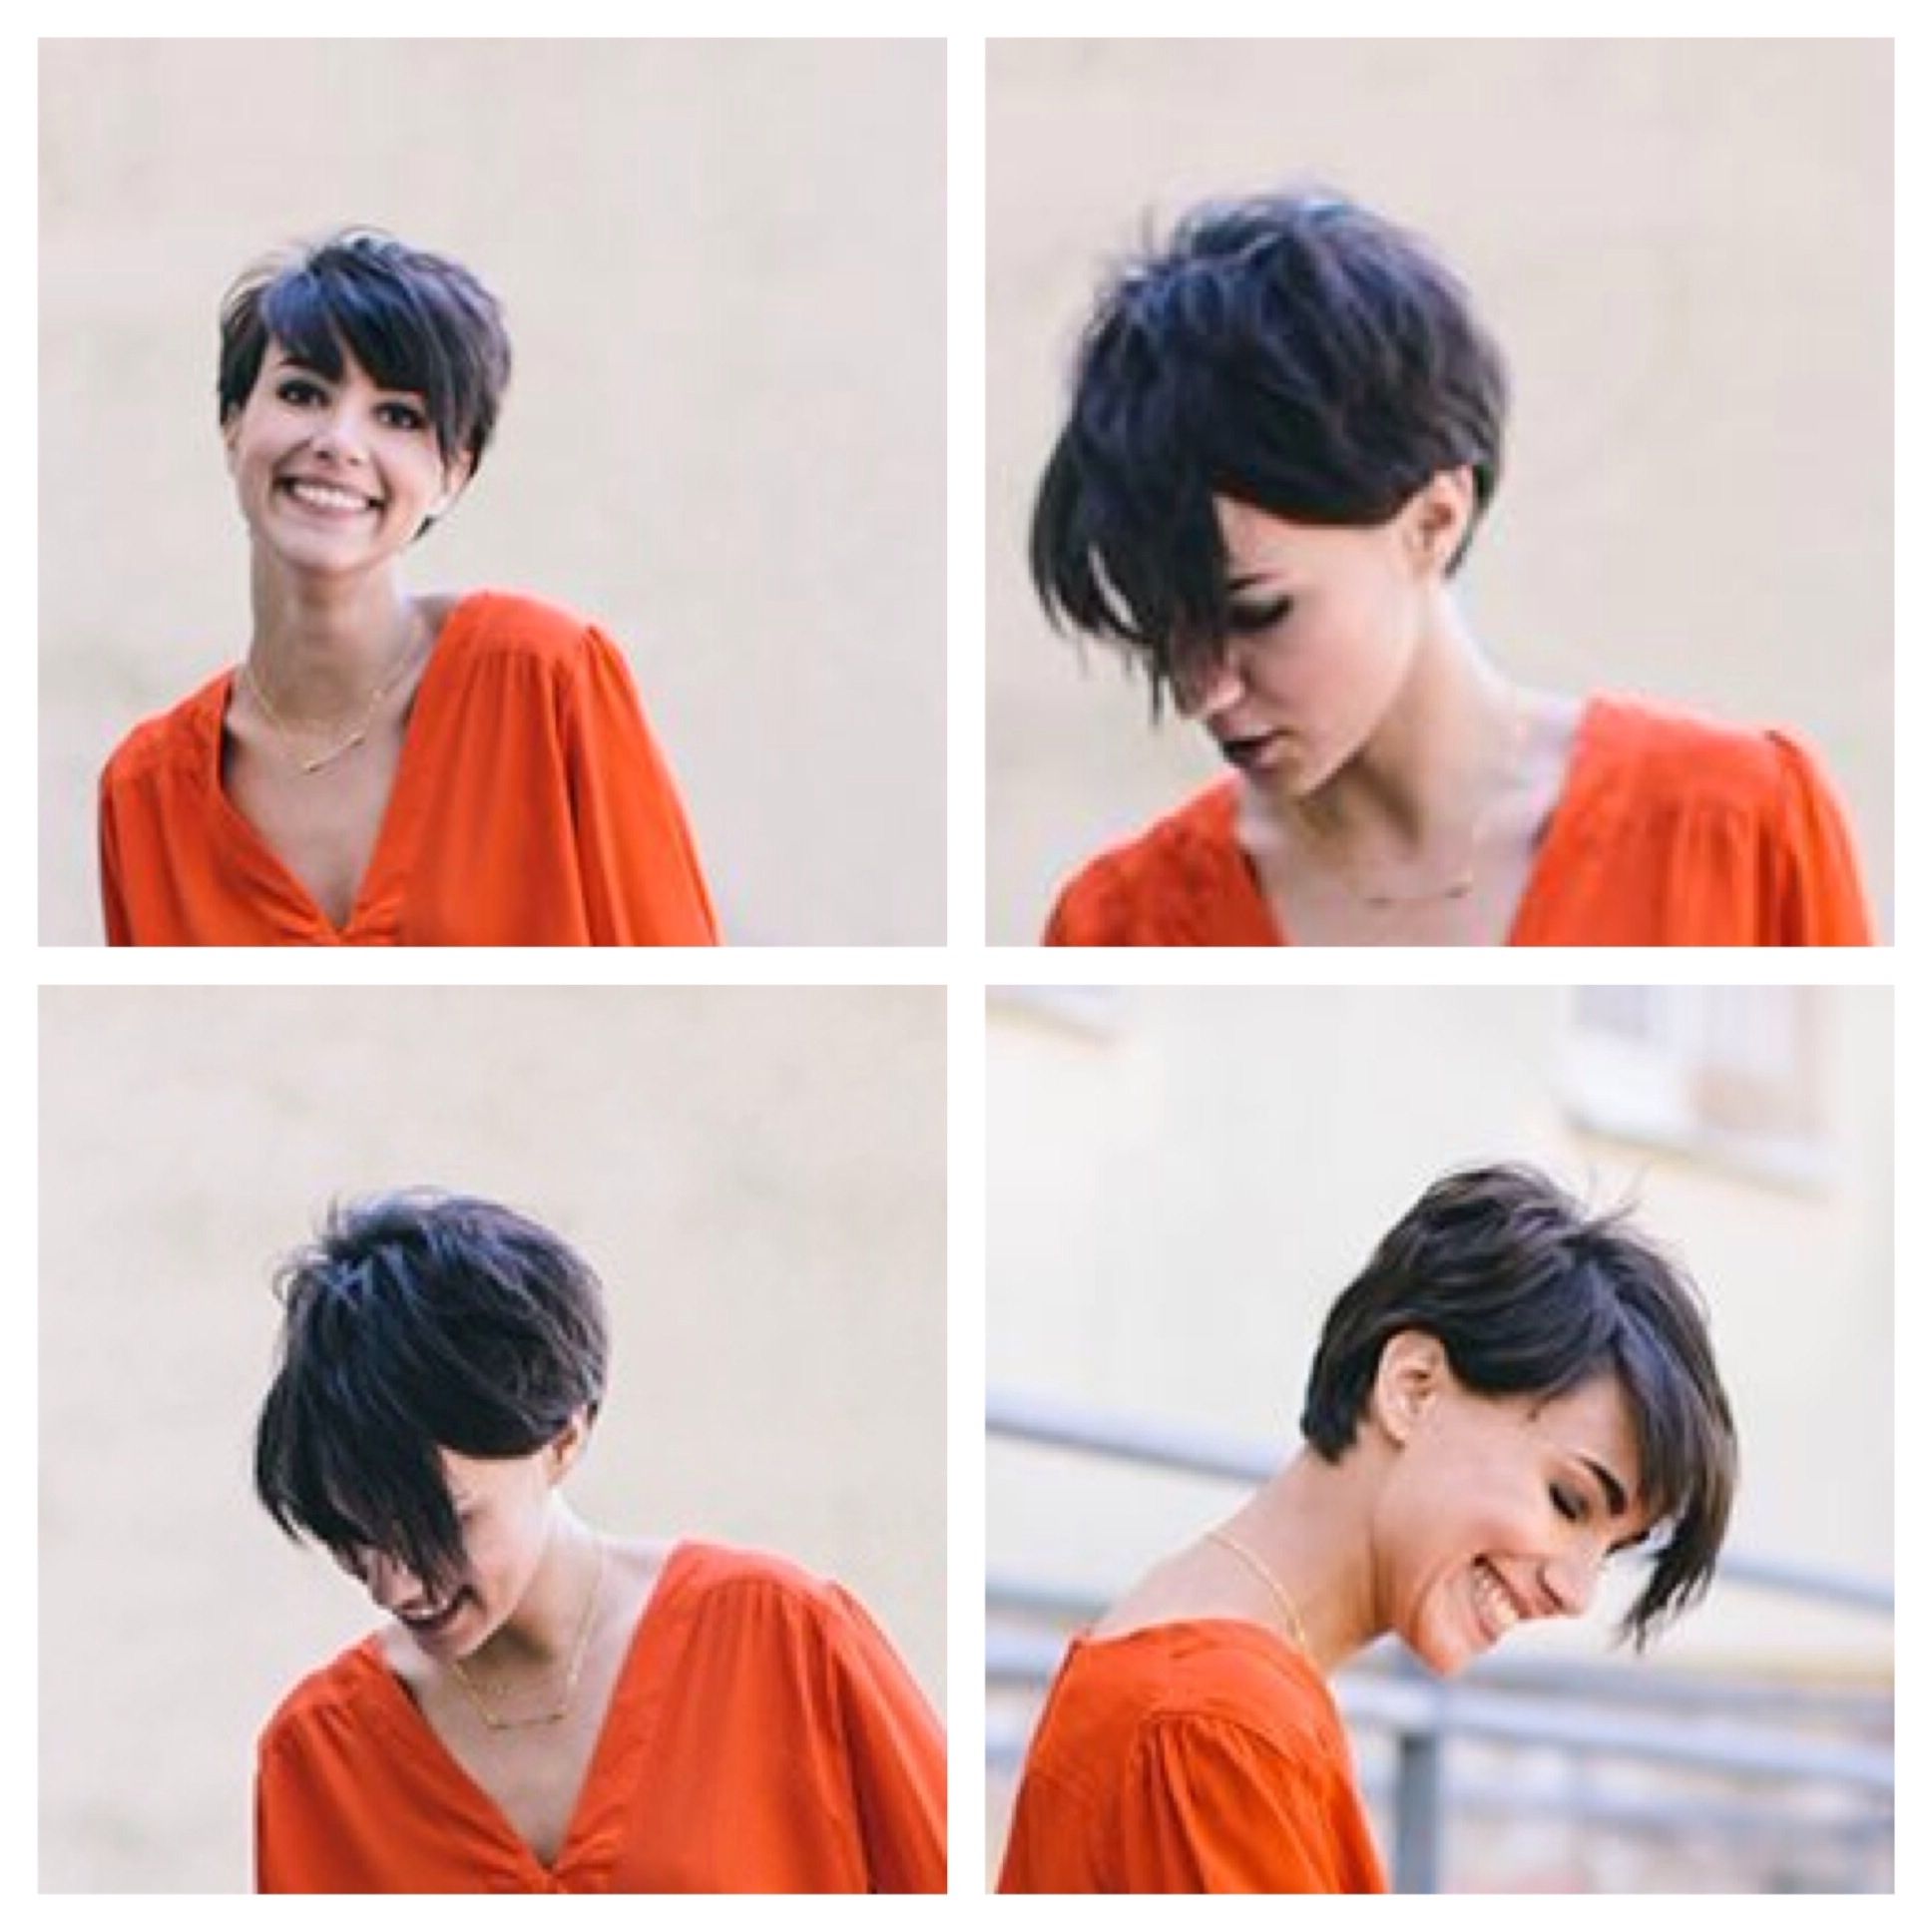 This Is A Good Pic To Bring To The Hairdresser To Show Different In Most Popular Short Pixie Hairstyles With Bangs (Photo 5 of 15)